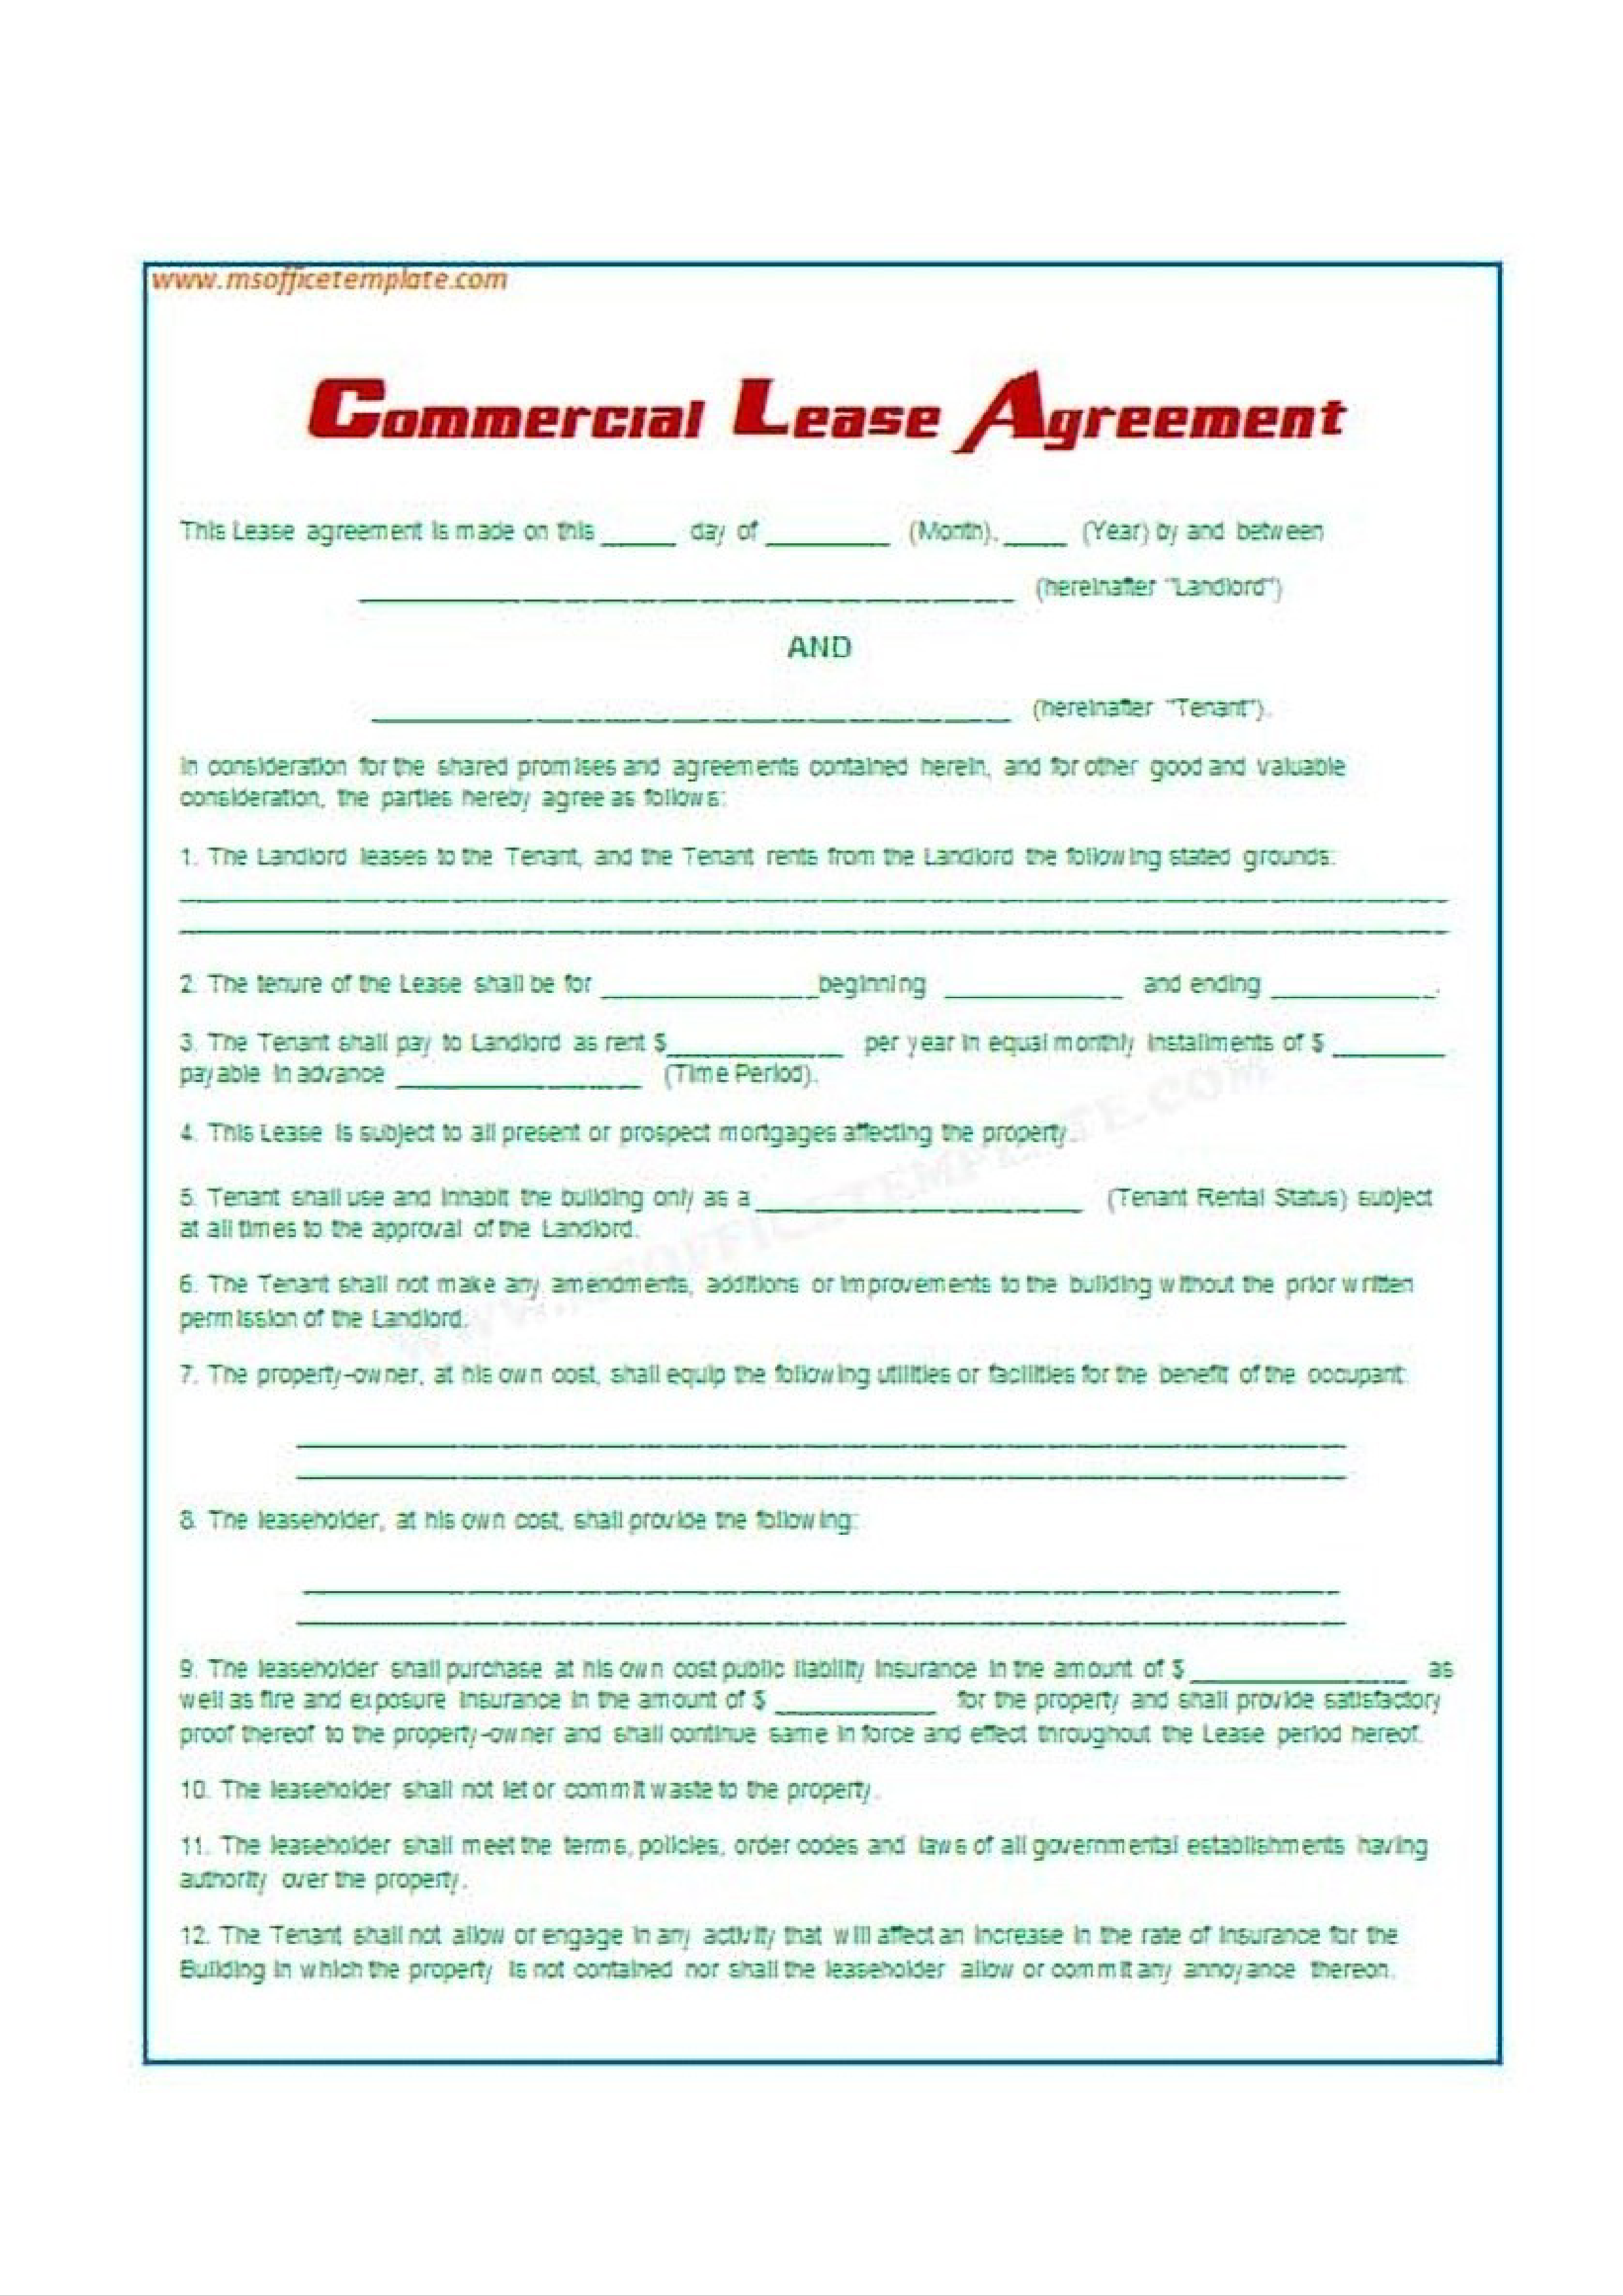 Lease Agreements Sample main image